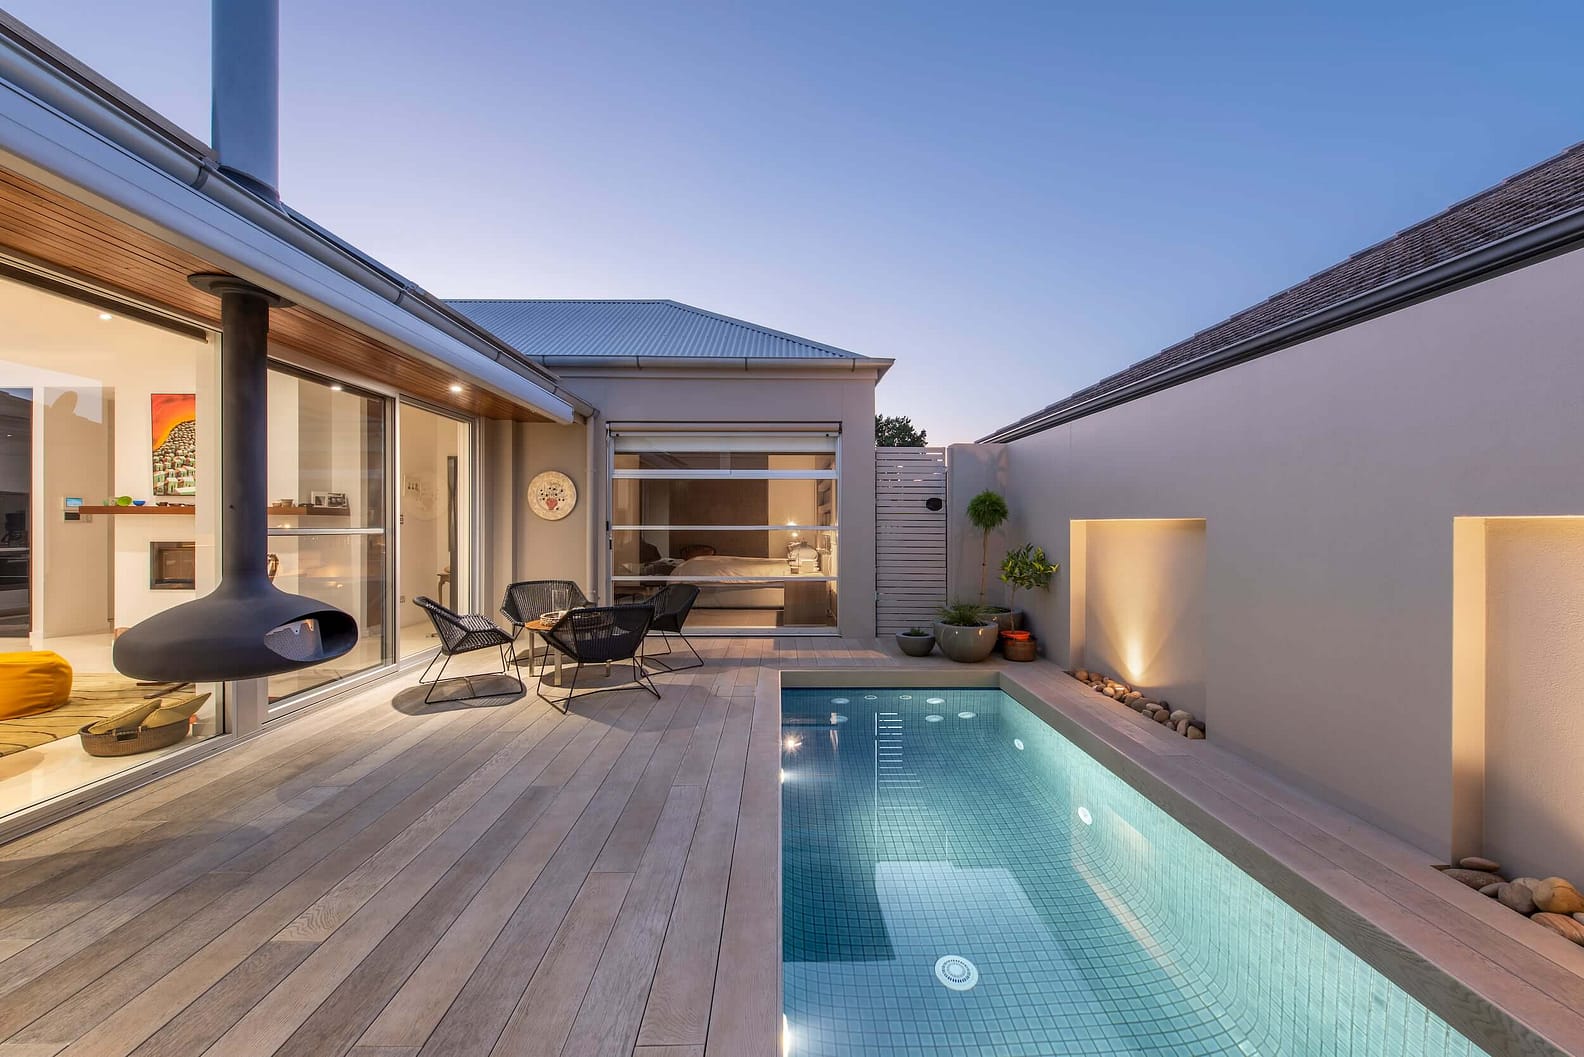 The Pool Deck Renovation Adelaide